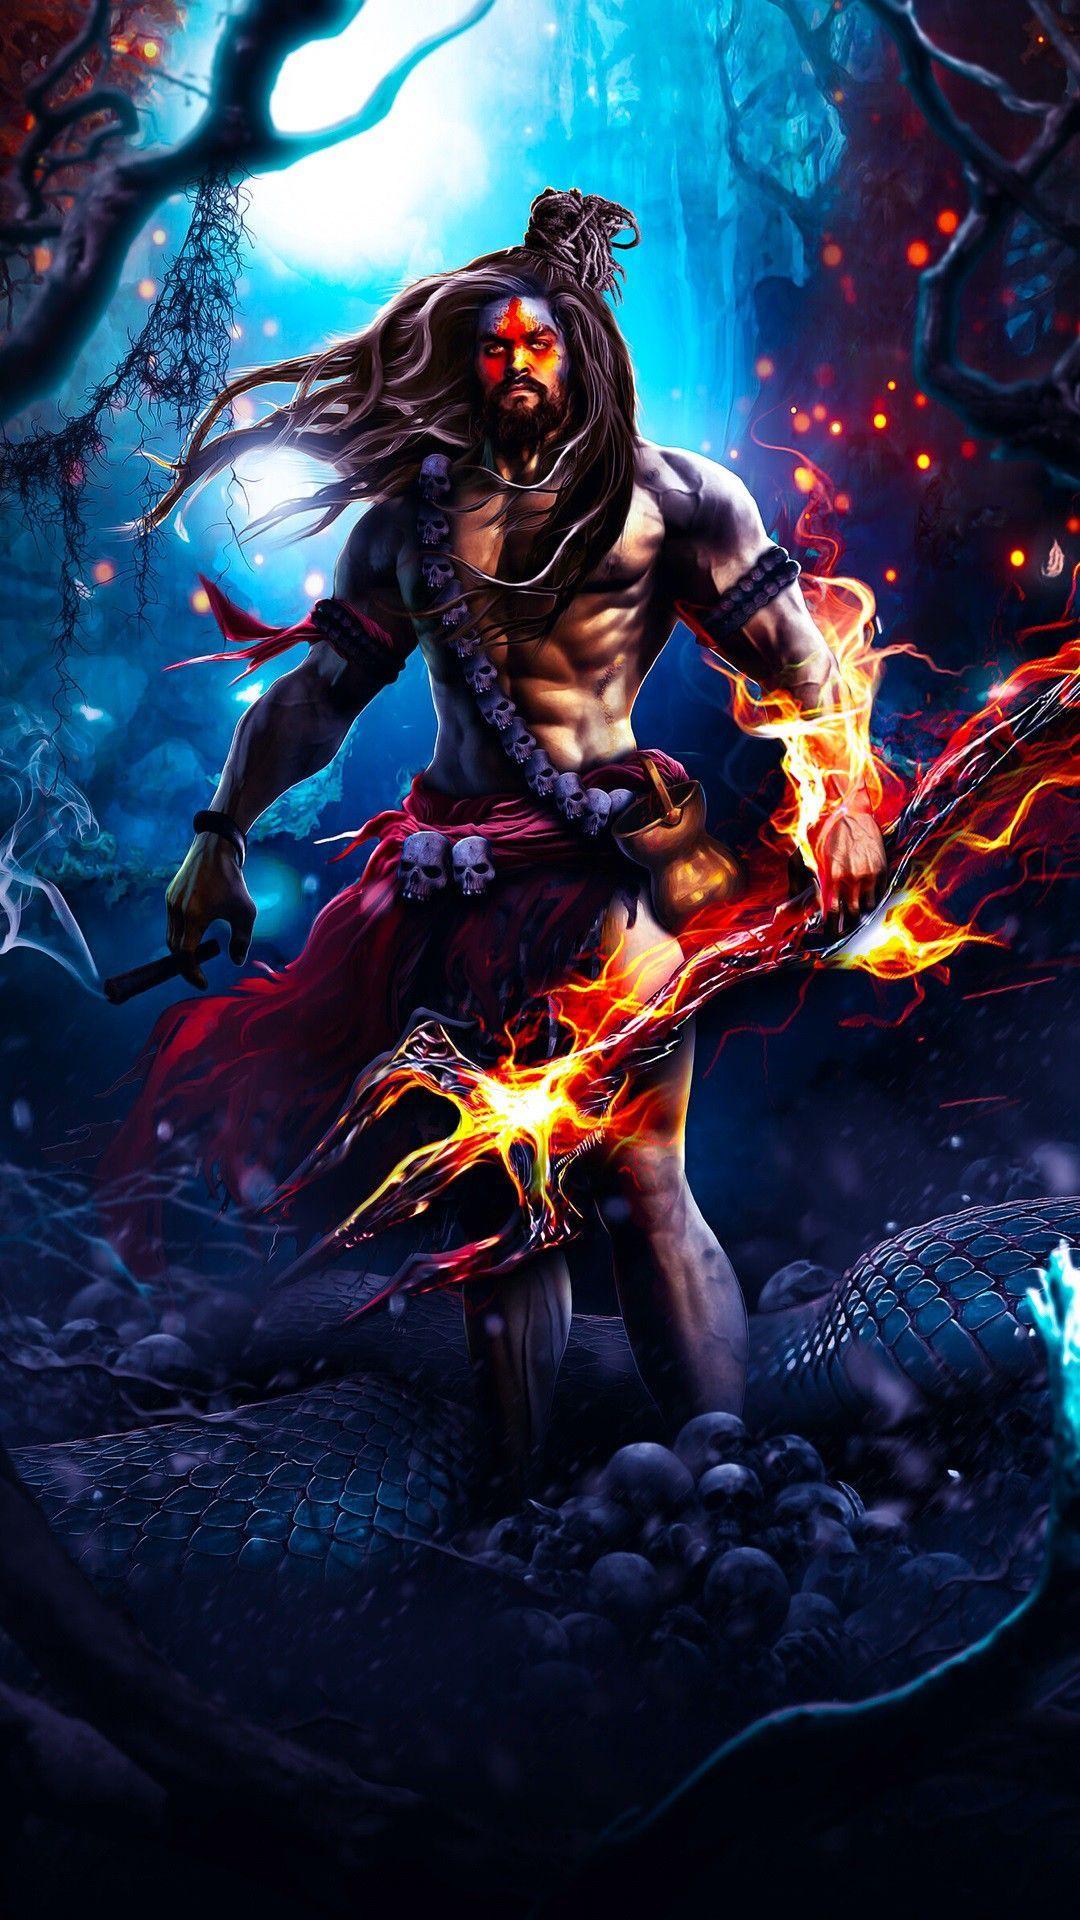 Lord Shiva Angry Wallpapers - Top Free Lord Shiva Angry Backgrounds